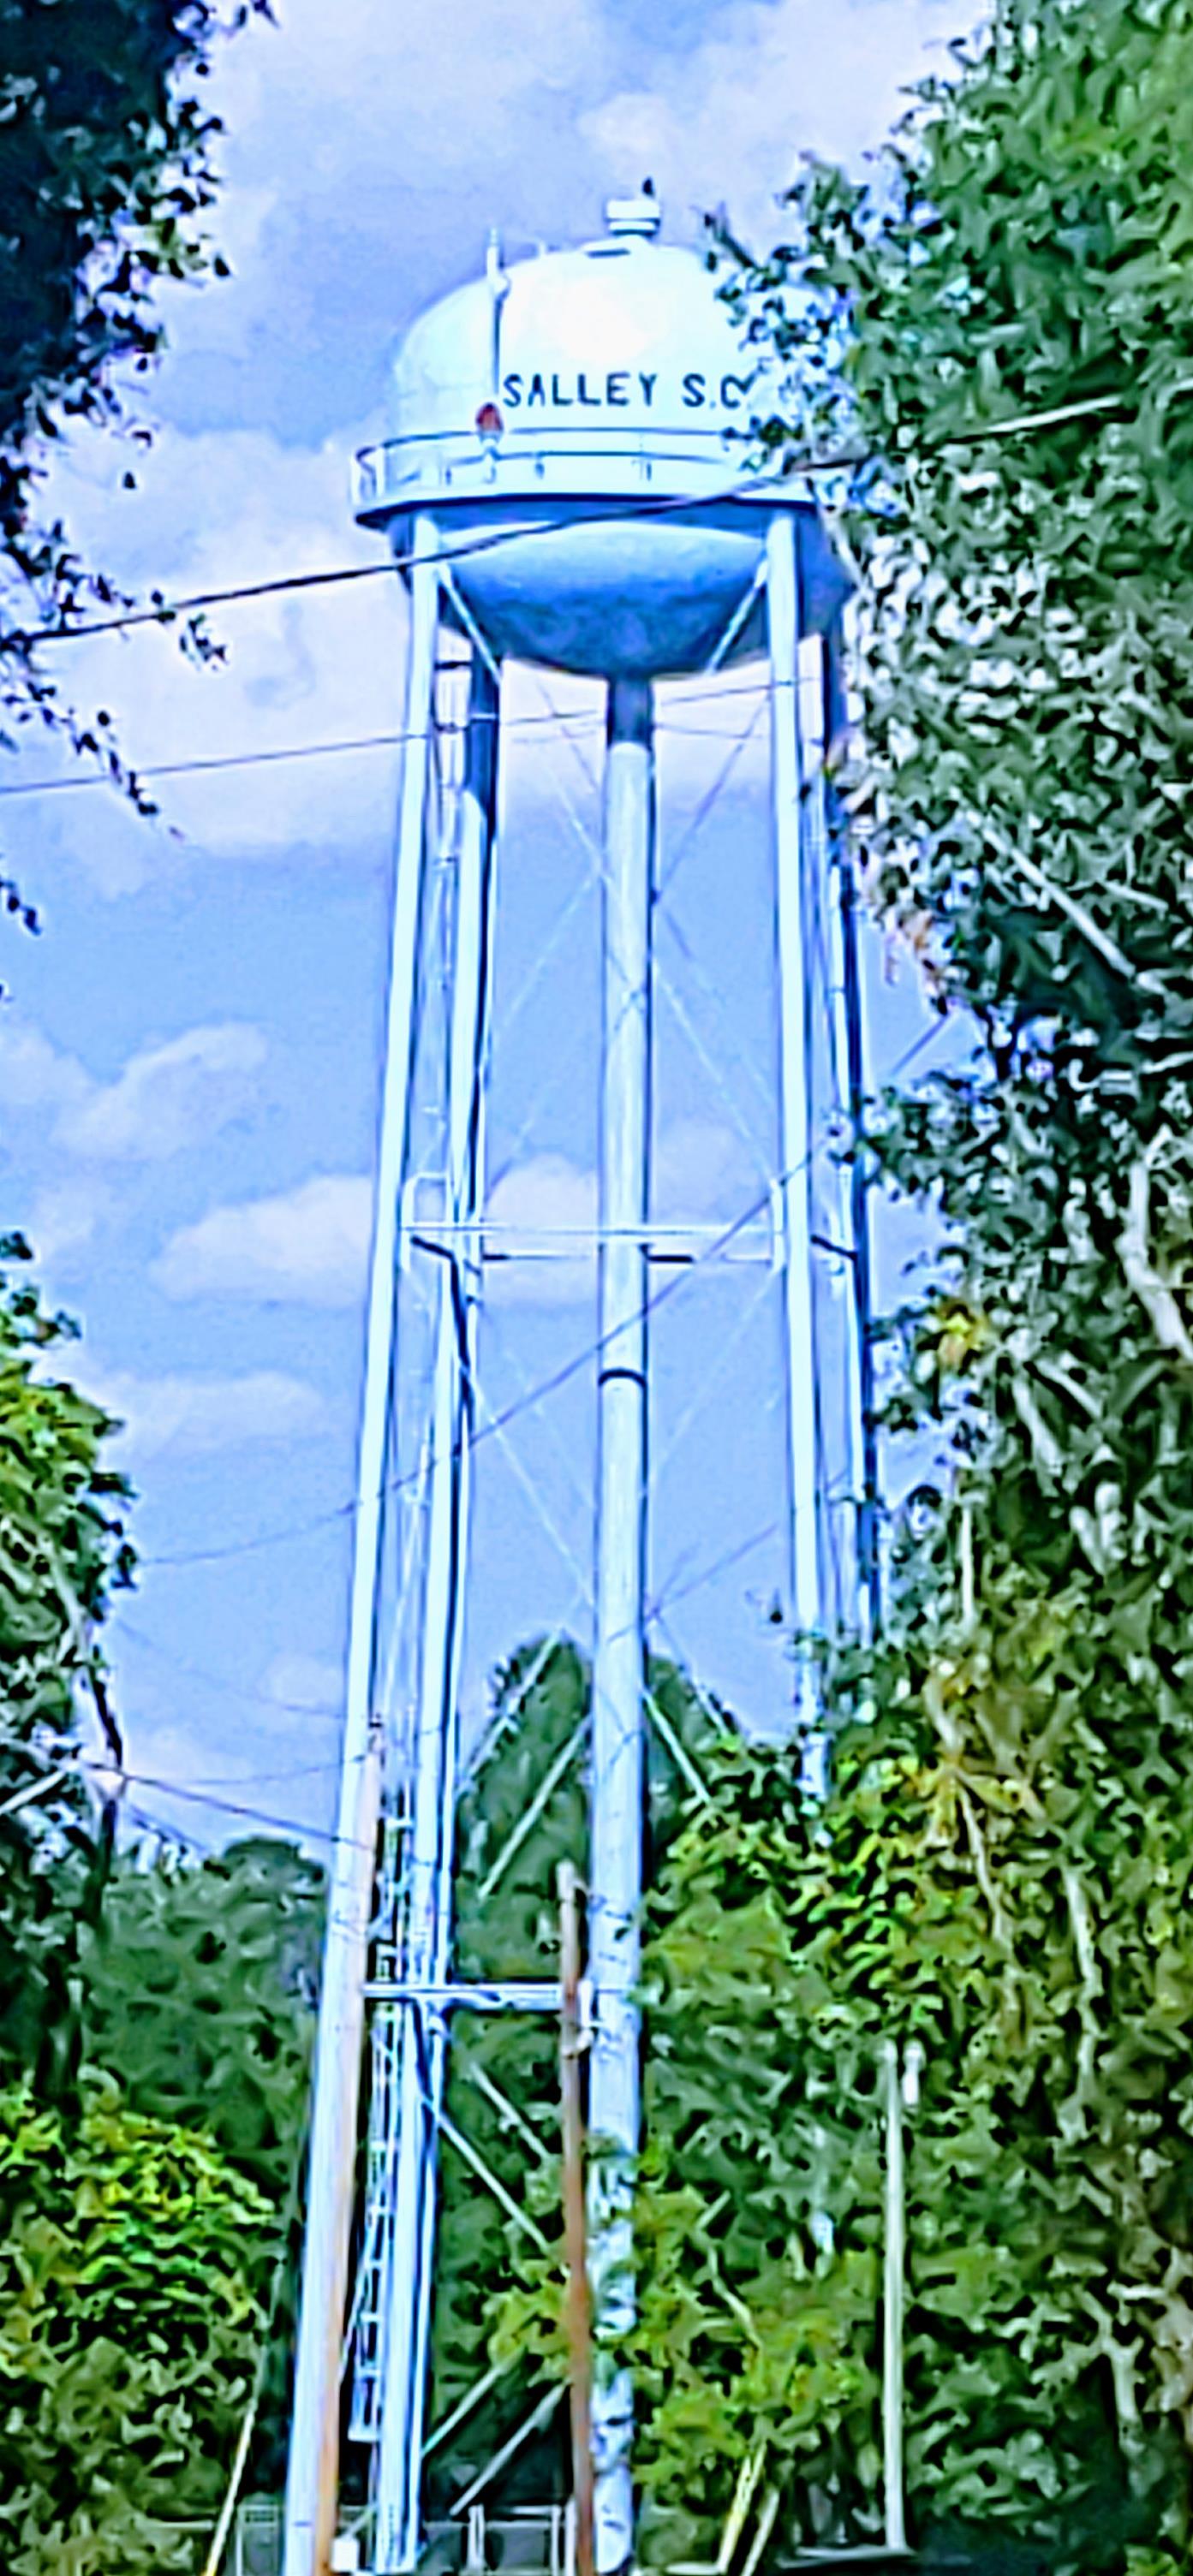 Water Tower Image